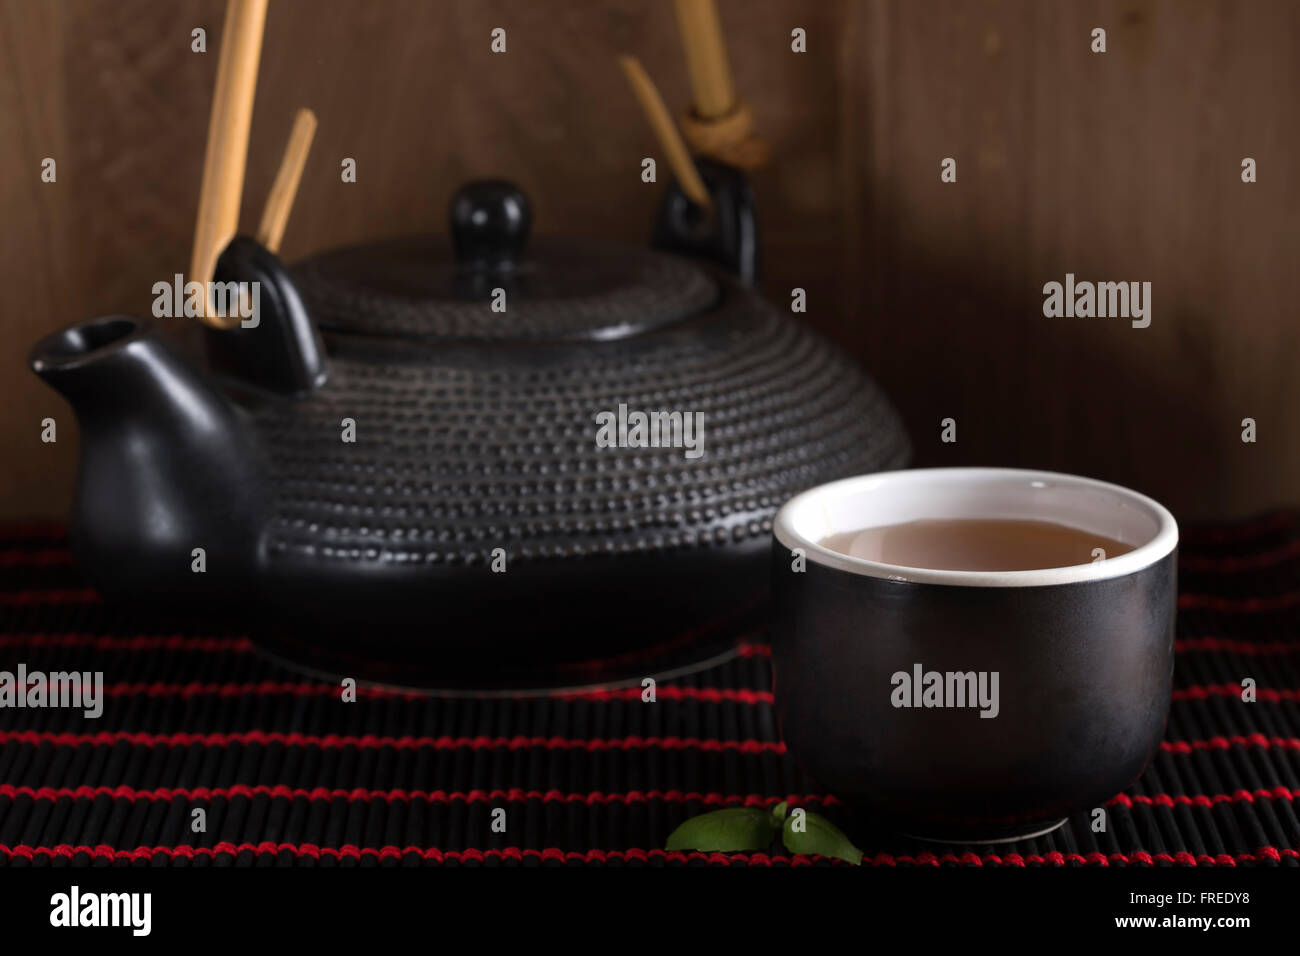 Image of traditional eastern teapot and teacup on bamboo rug Stock Photo